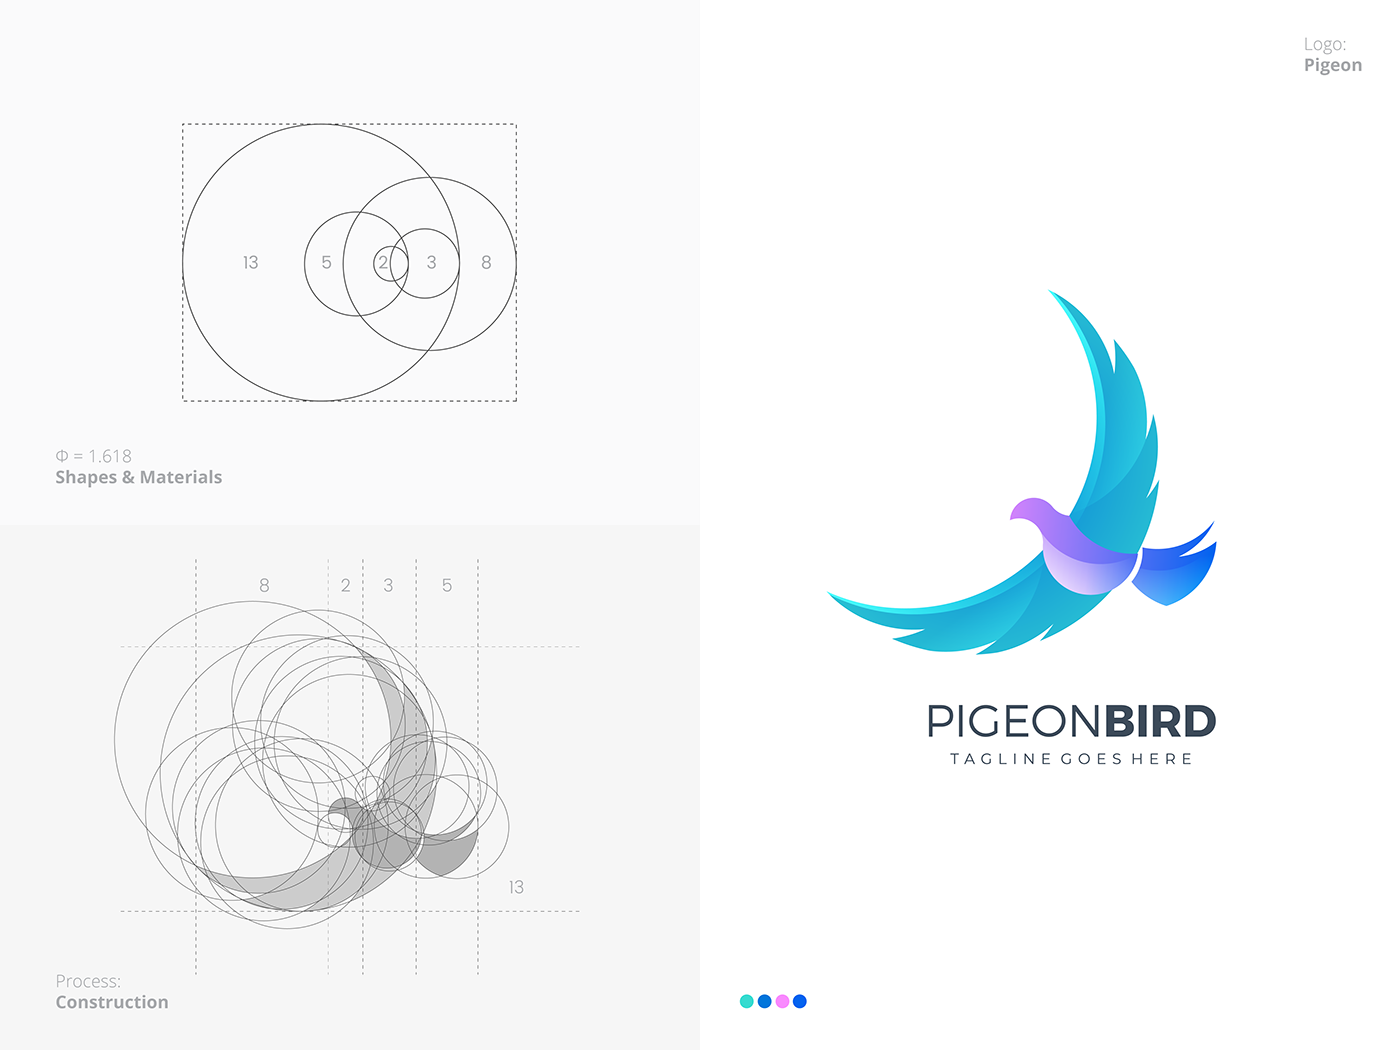 Golden Ratio animal logo circle grid colorful geometric creative best gradient abstract